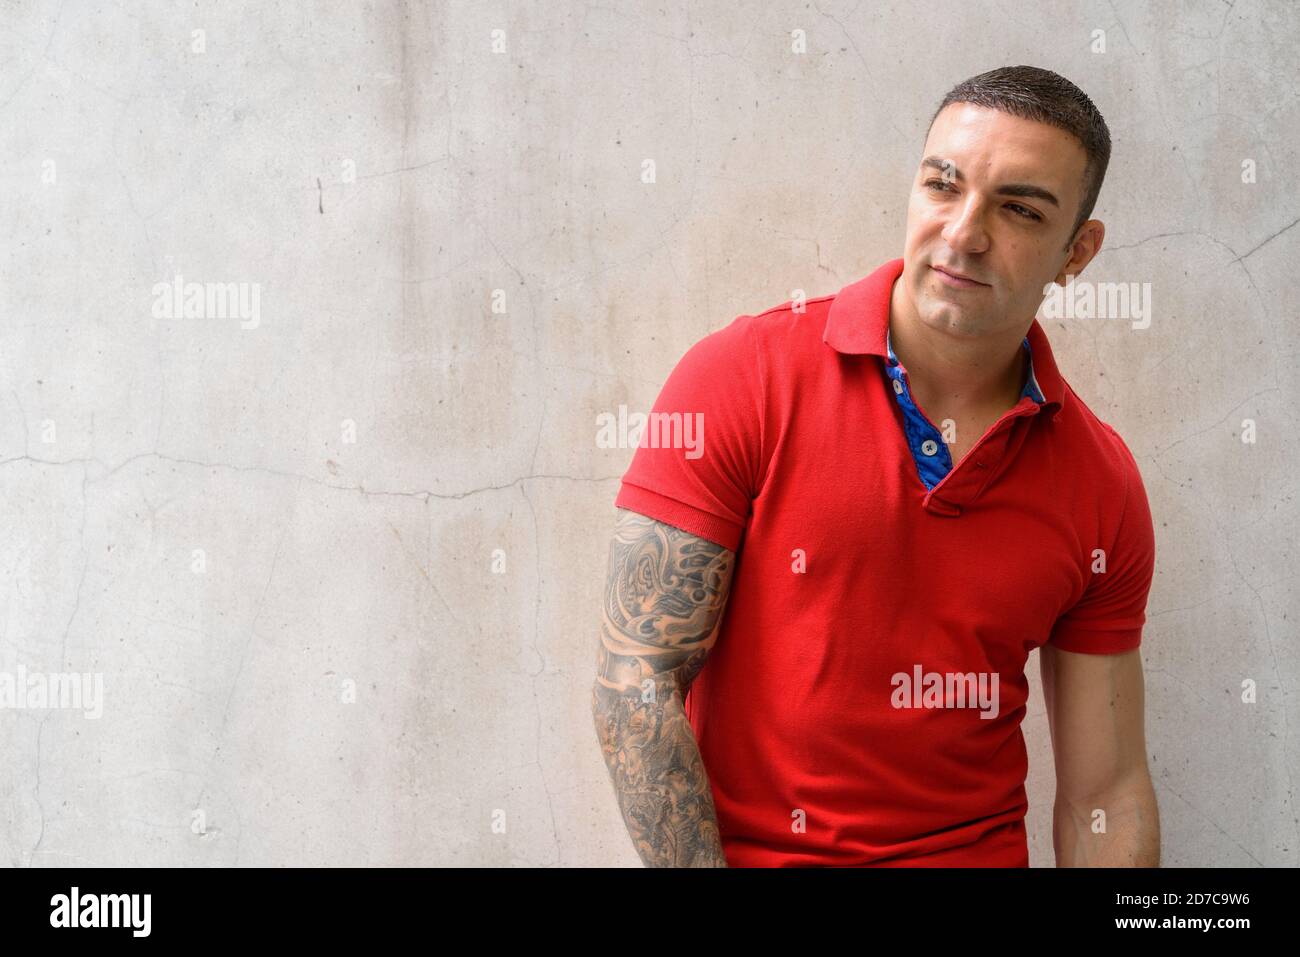 Portrait of handsome man with tattoos thinking outdoors Stock Photo